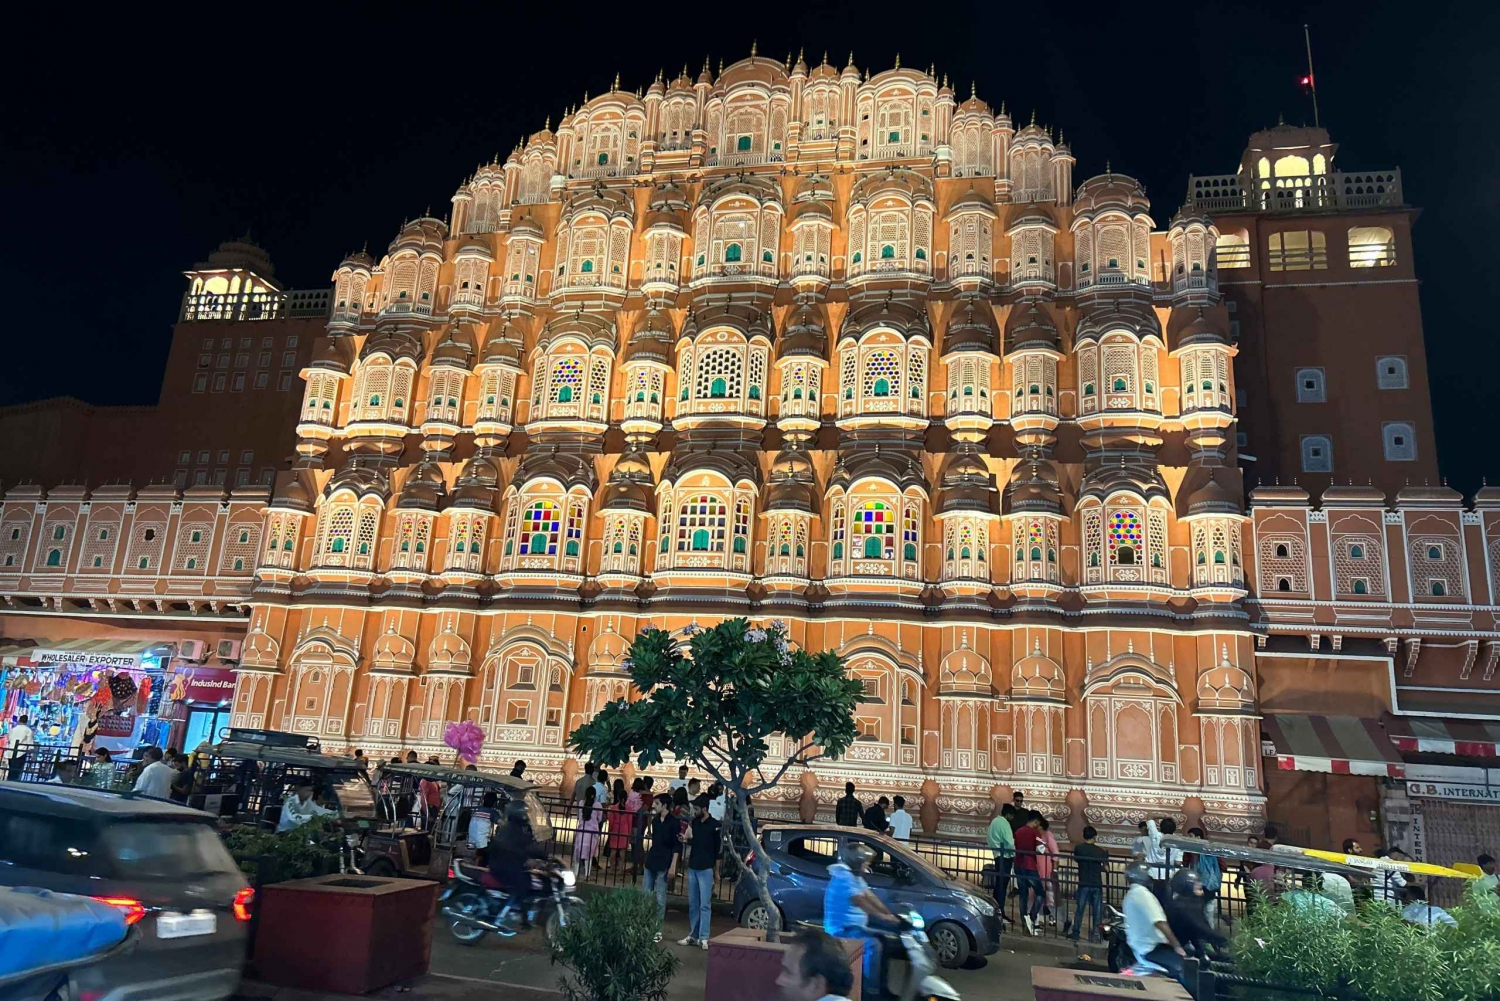 Jaipur: Guided Night Tour With Optional Food Tasting